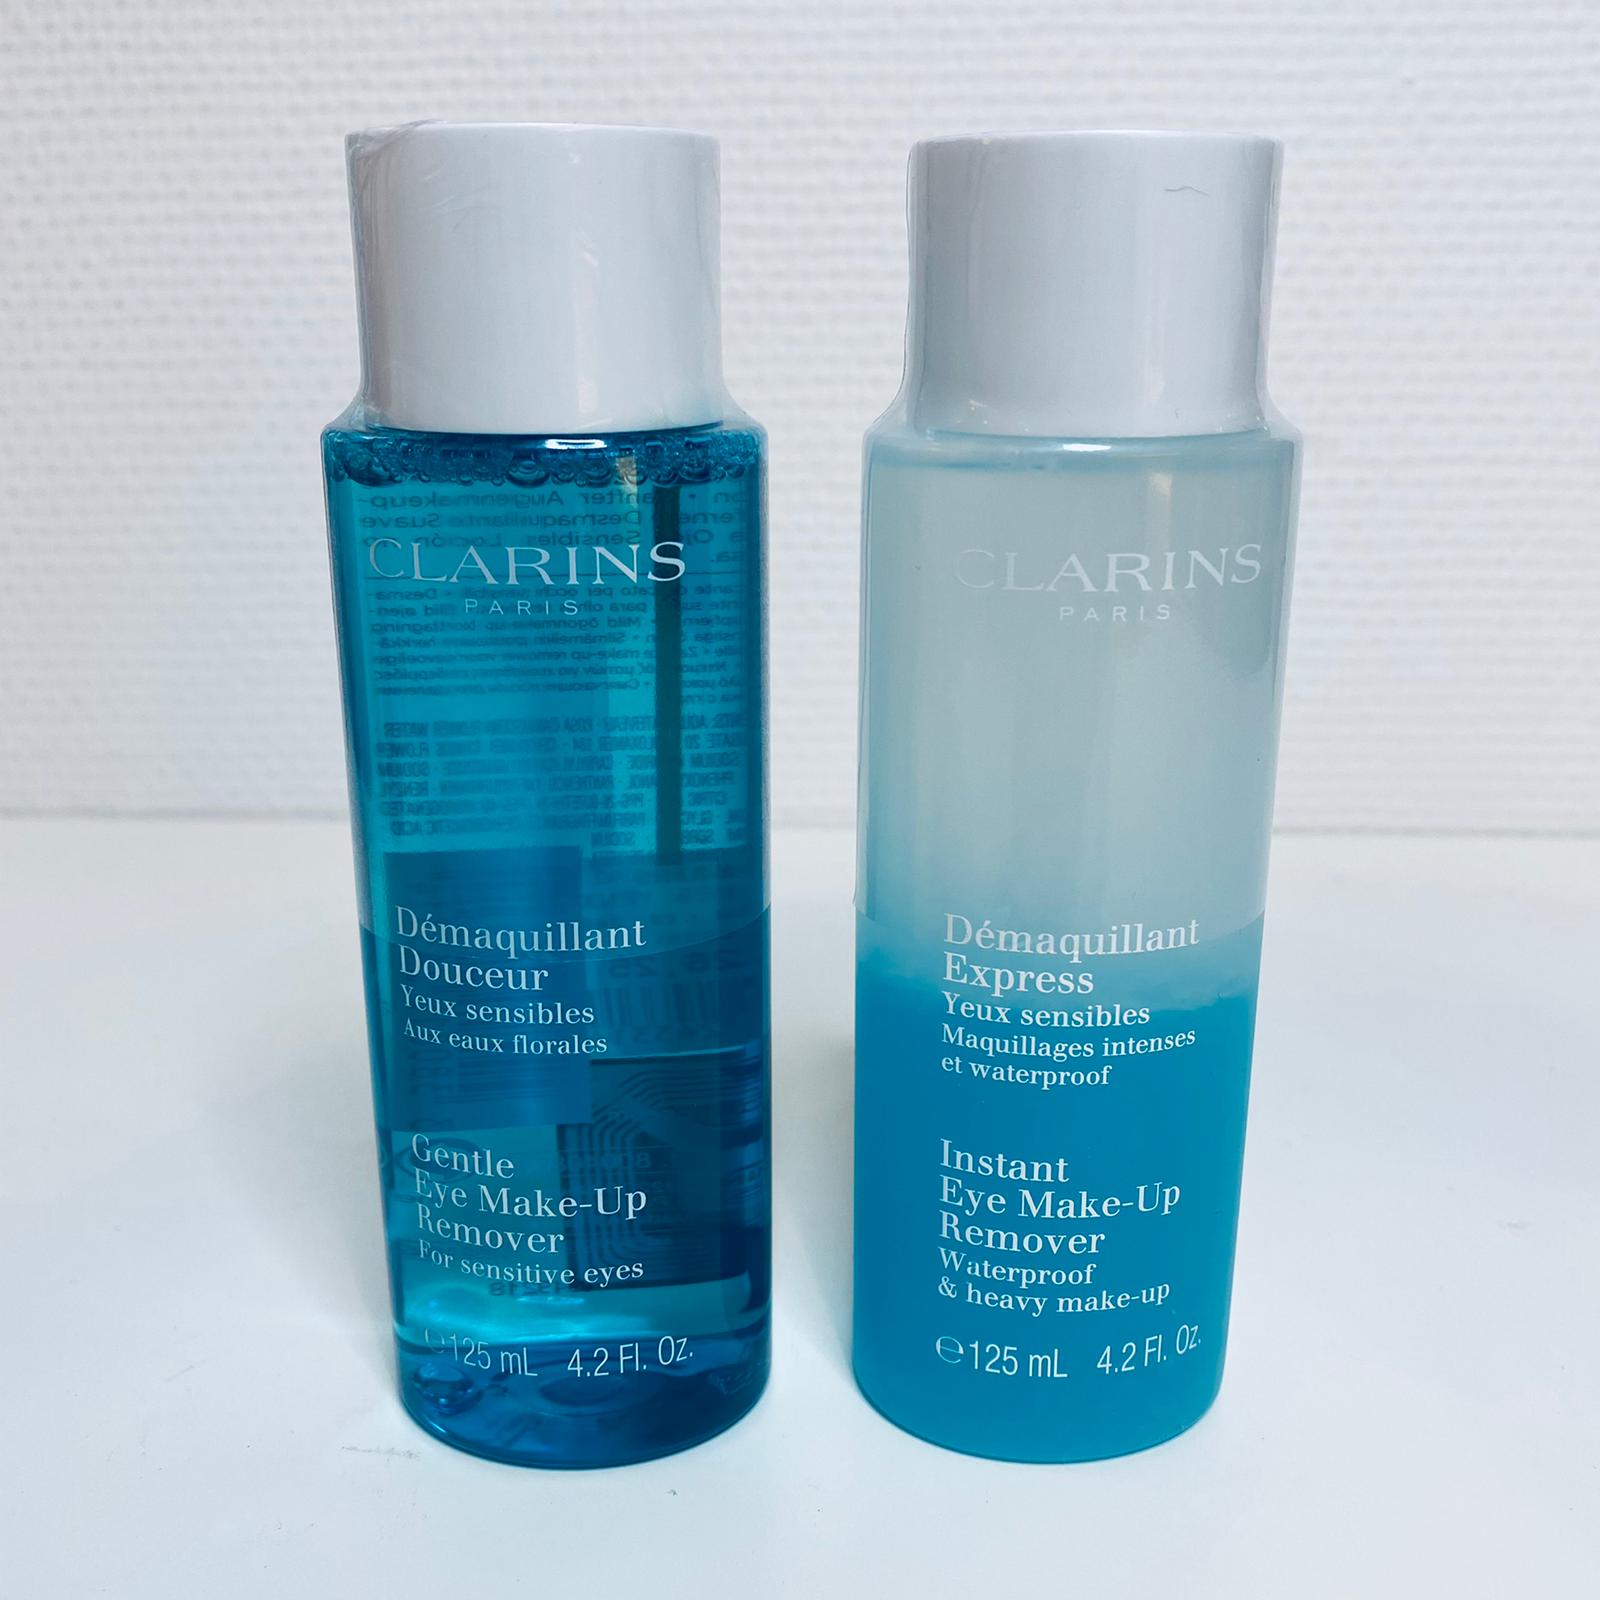 Clarins gentle eye makeup remover for sensitive eyes. 125 ml